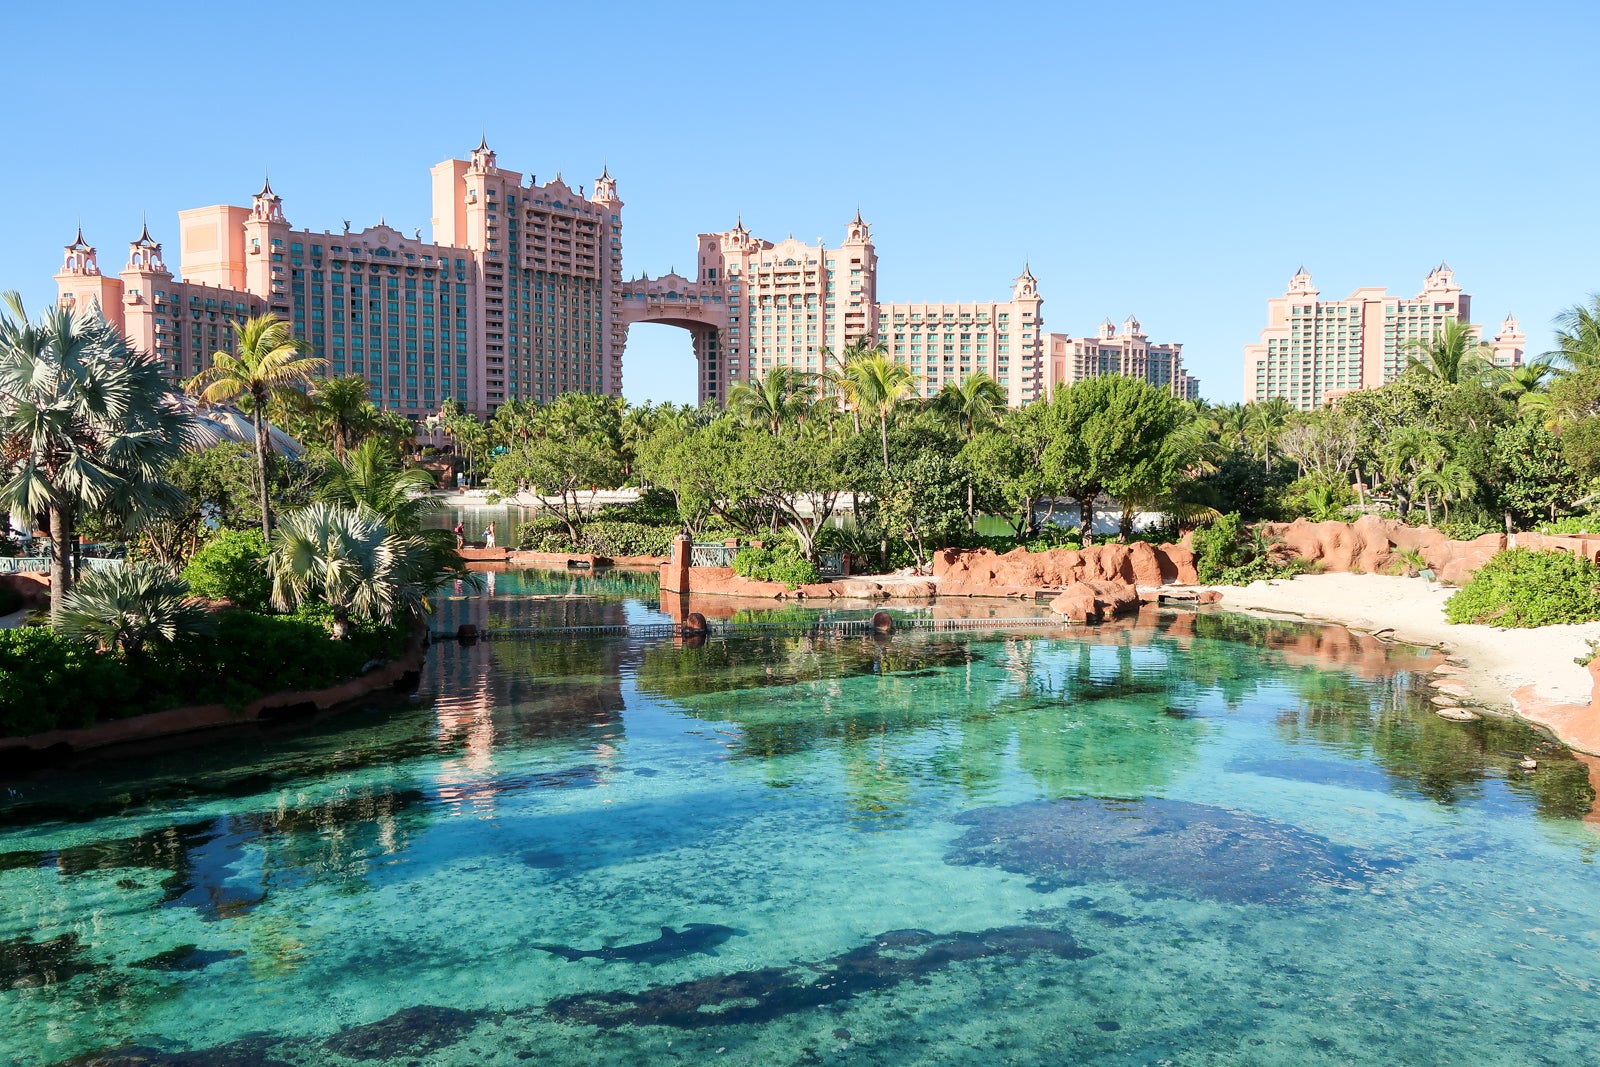 How To Visit Atlantis On A Budget